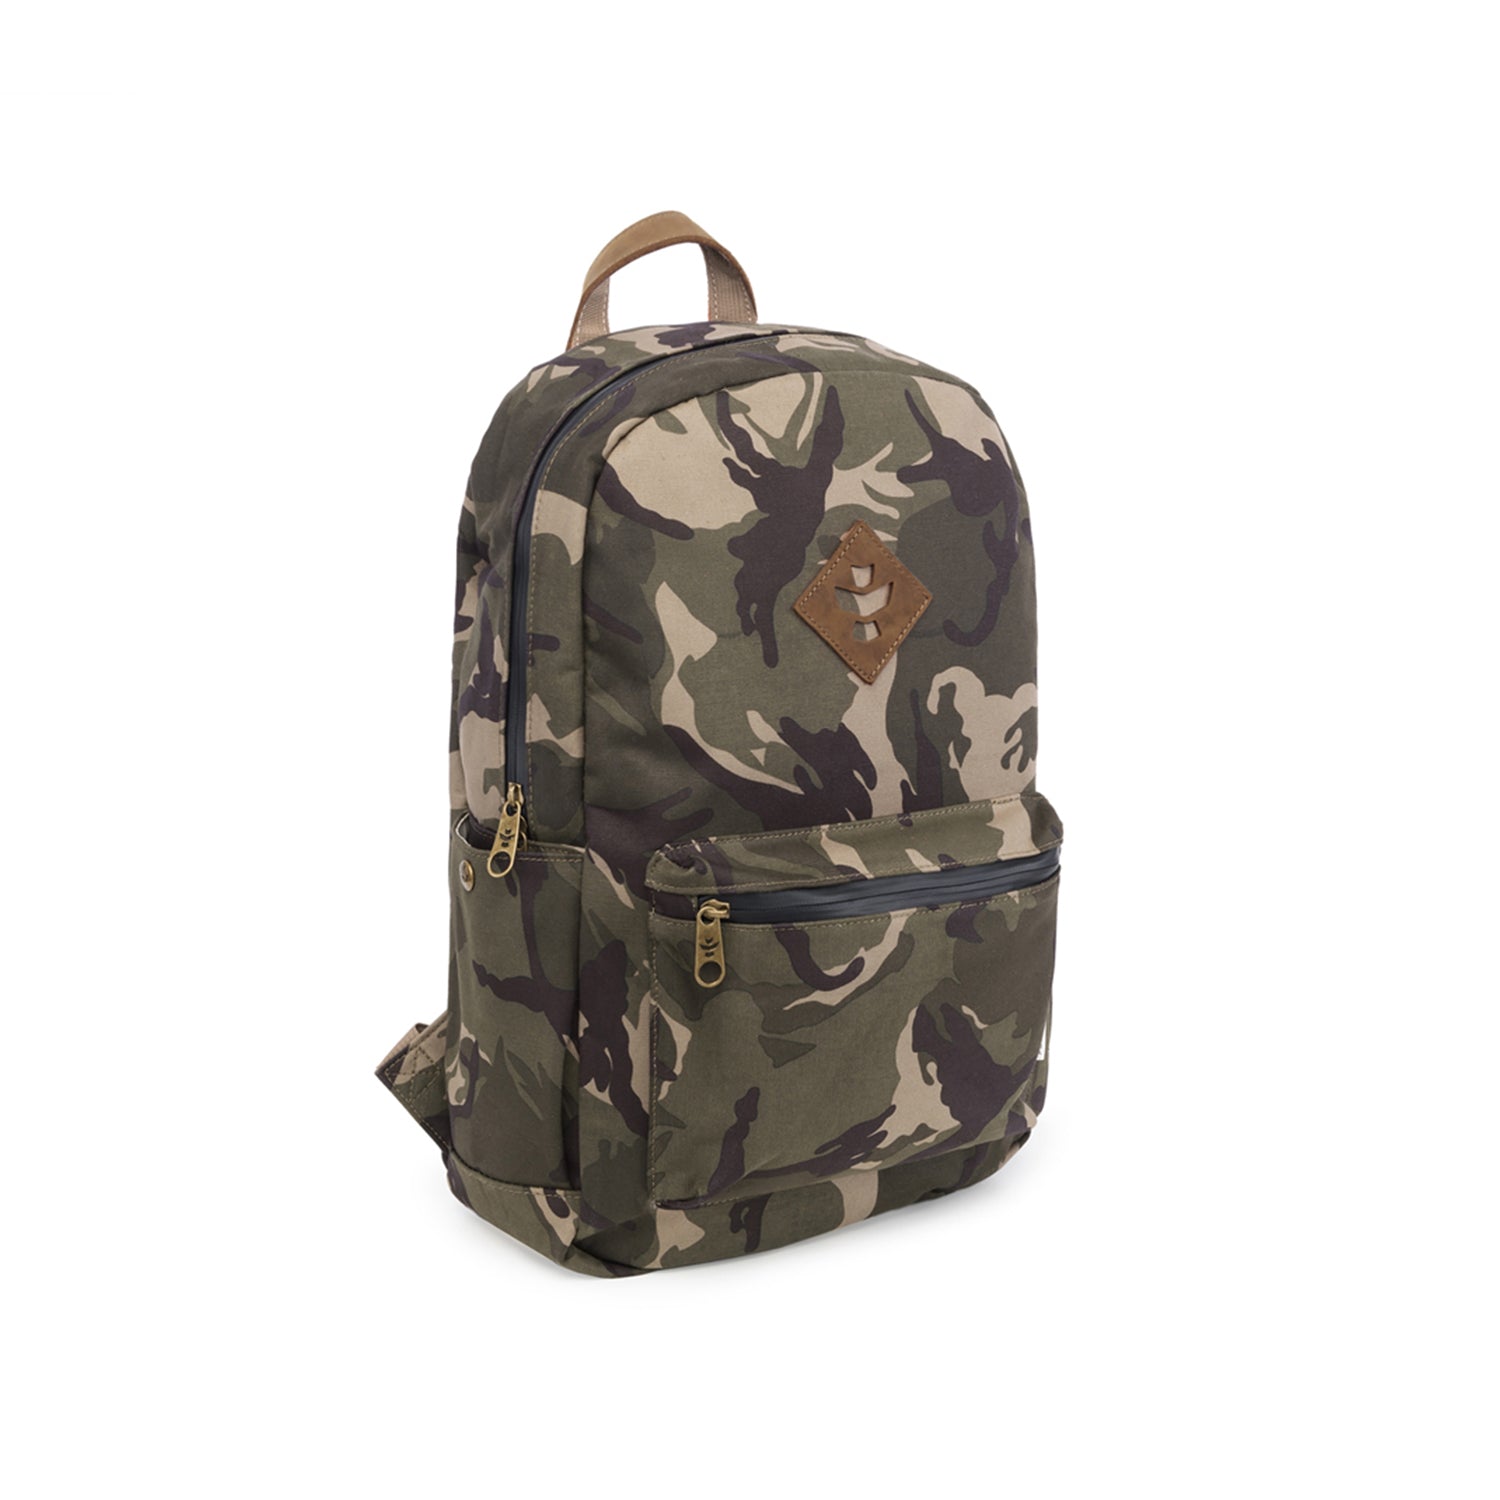 Camo Brown Canvas Smell Proof Water Resistant Backpack Bag